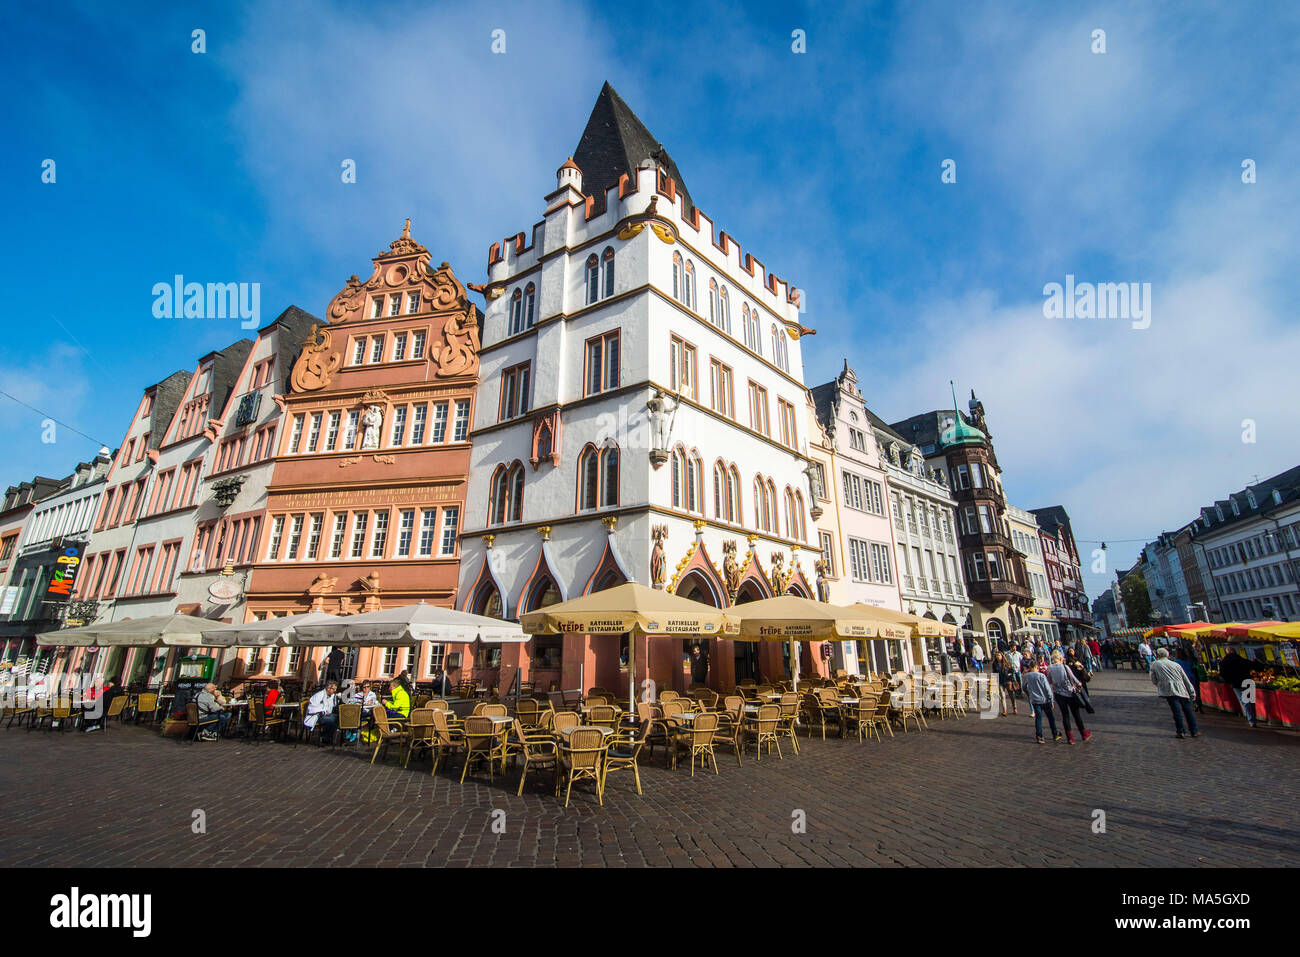 Main market in the center of the medieval Unesco world heritage sight, Trier, Moselle valley, Rhineland-Palatinate, Germany Stock Photo